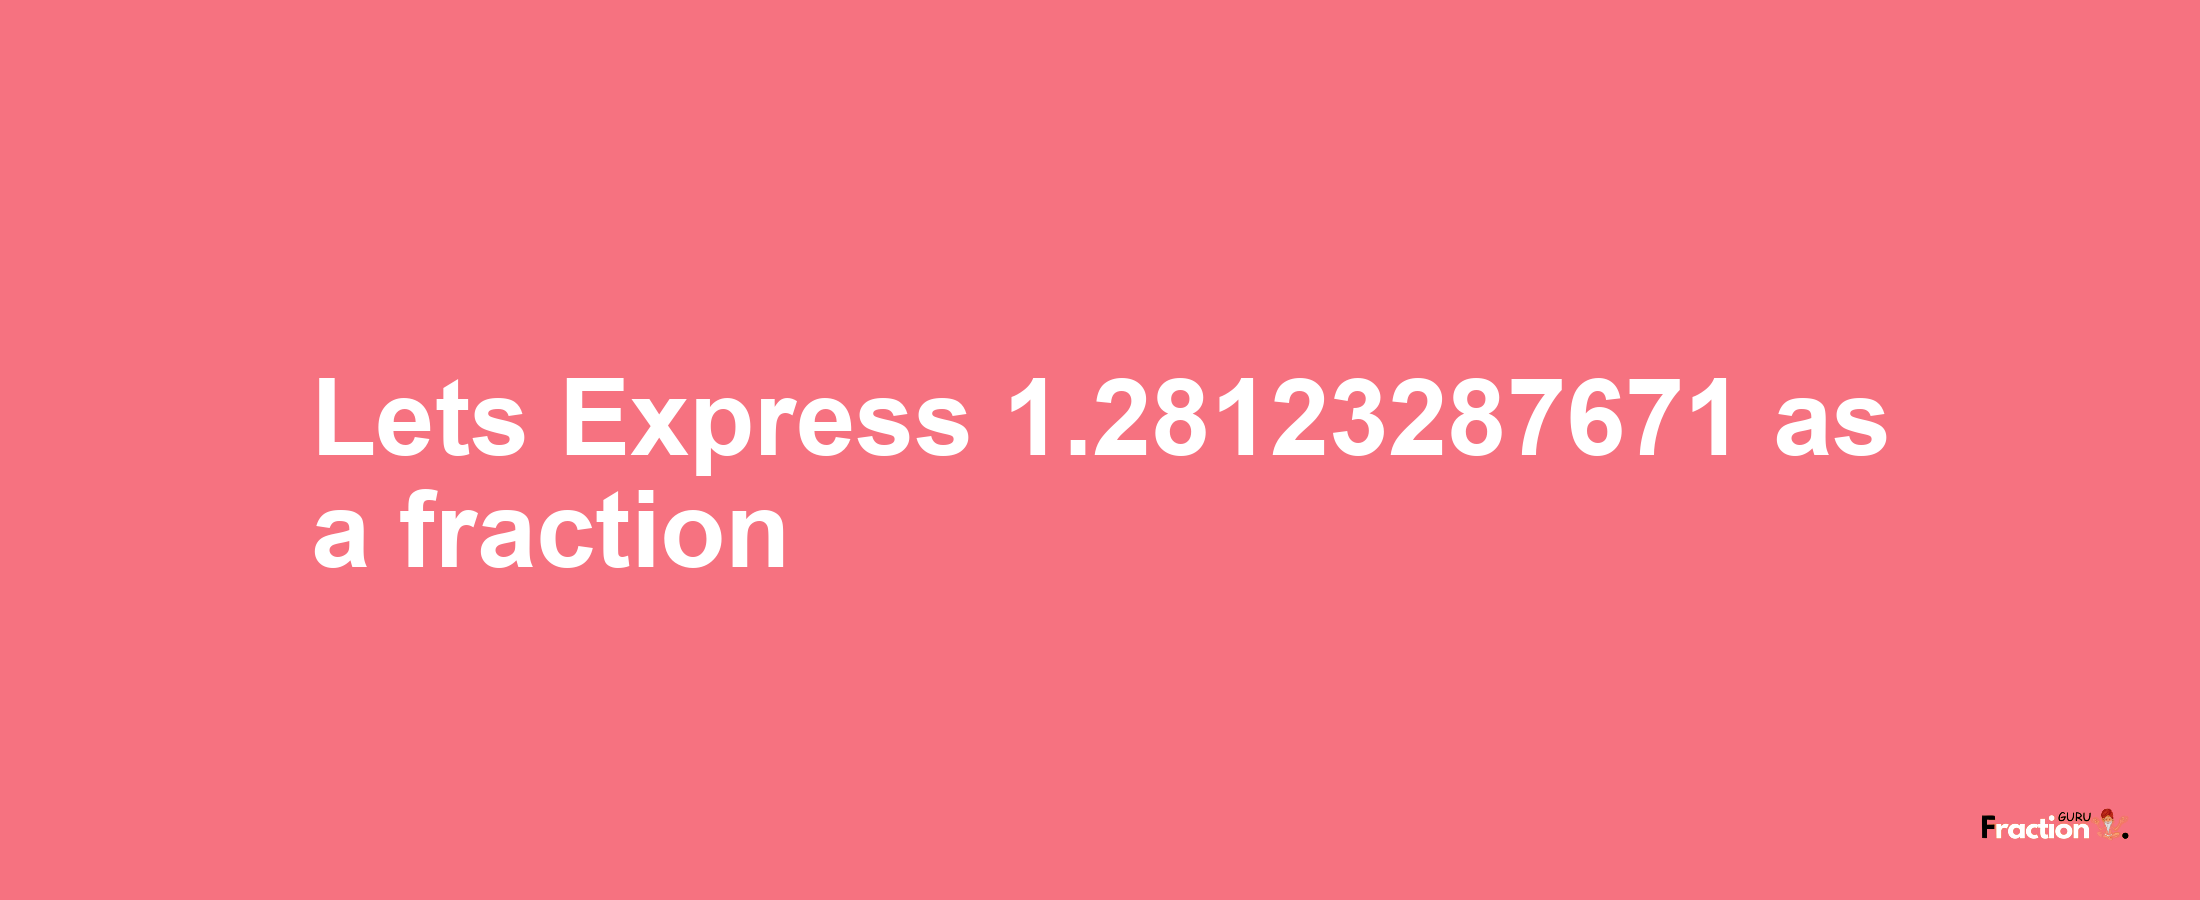 Lets Express 1.28123287671 as afraction